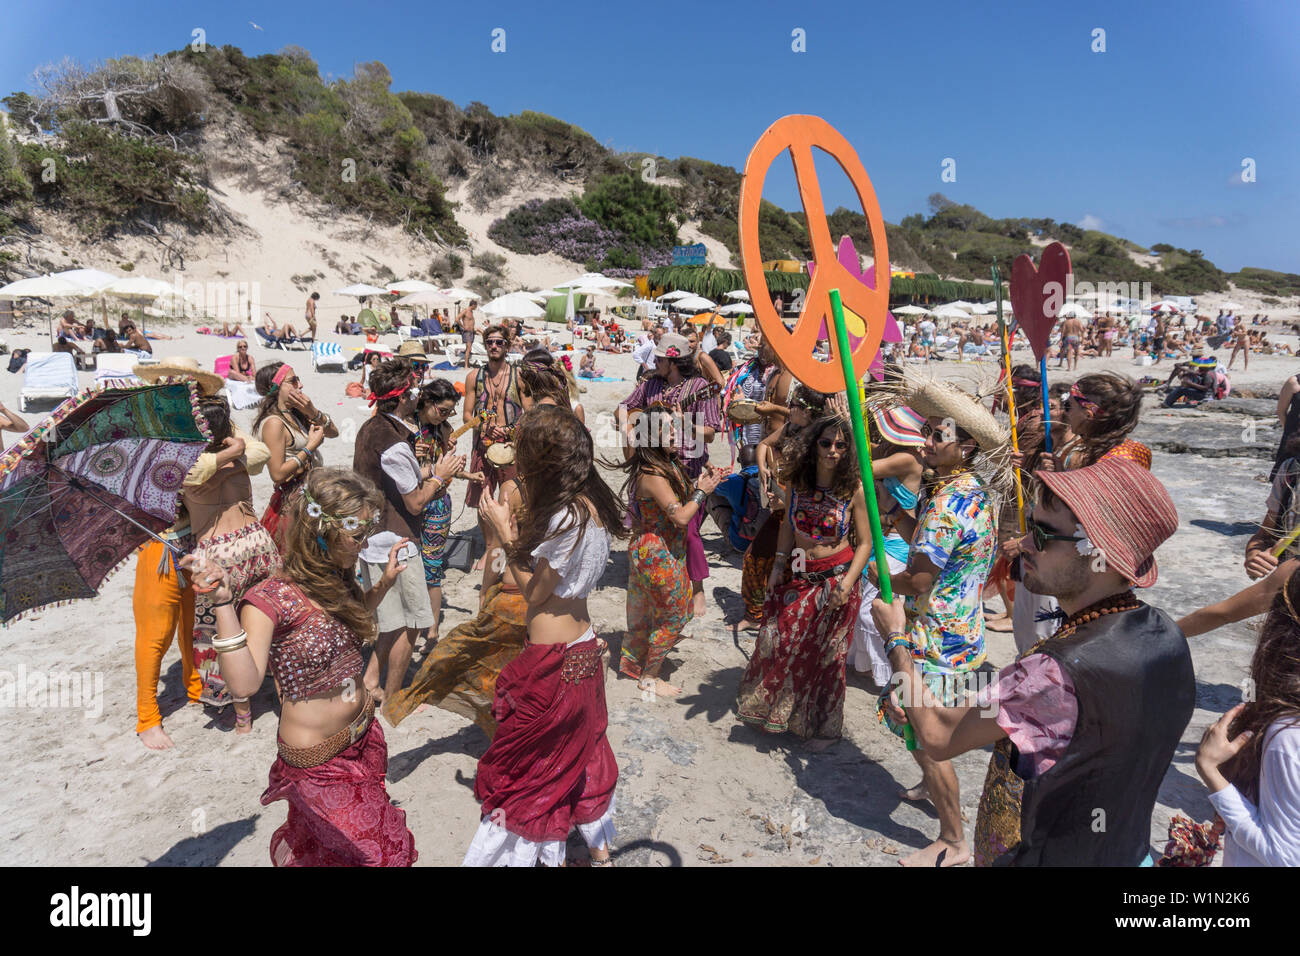 Promotion Group for Flower Power Party at Pacha Club, Playa ses Salines, Ibiza, Spain Stock Photo